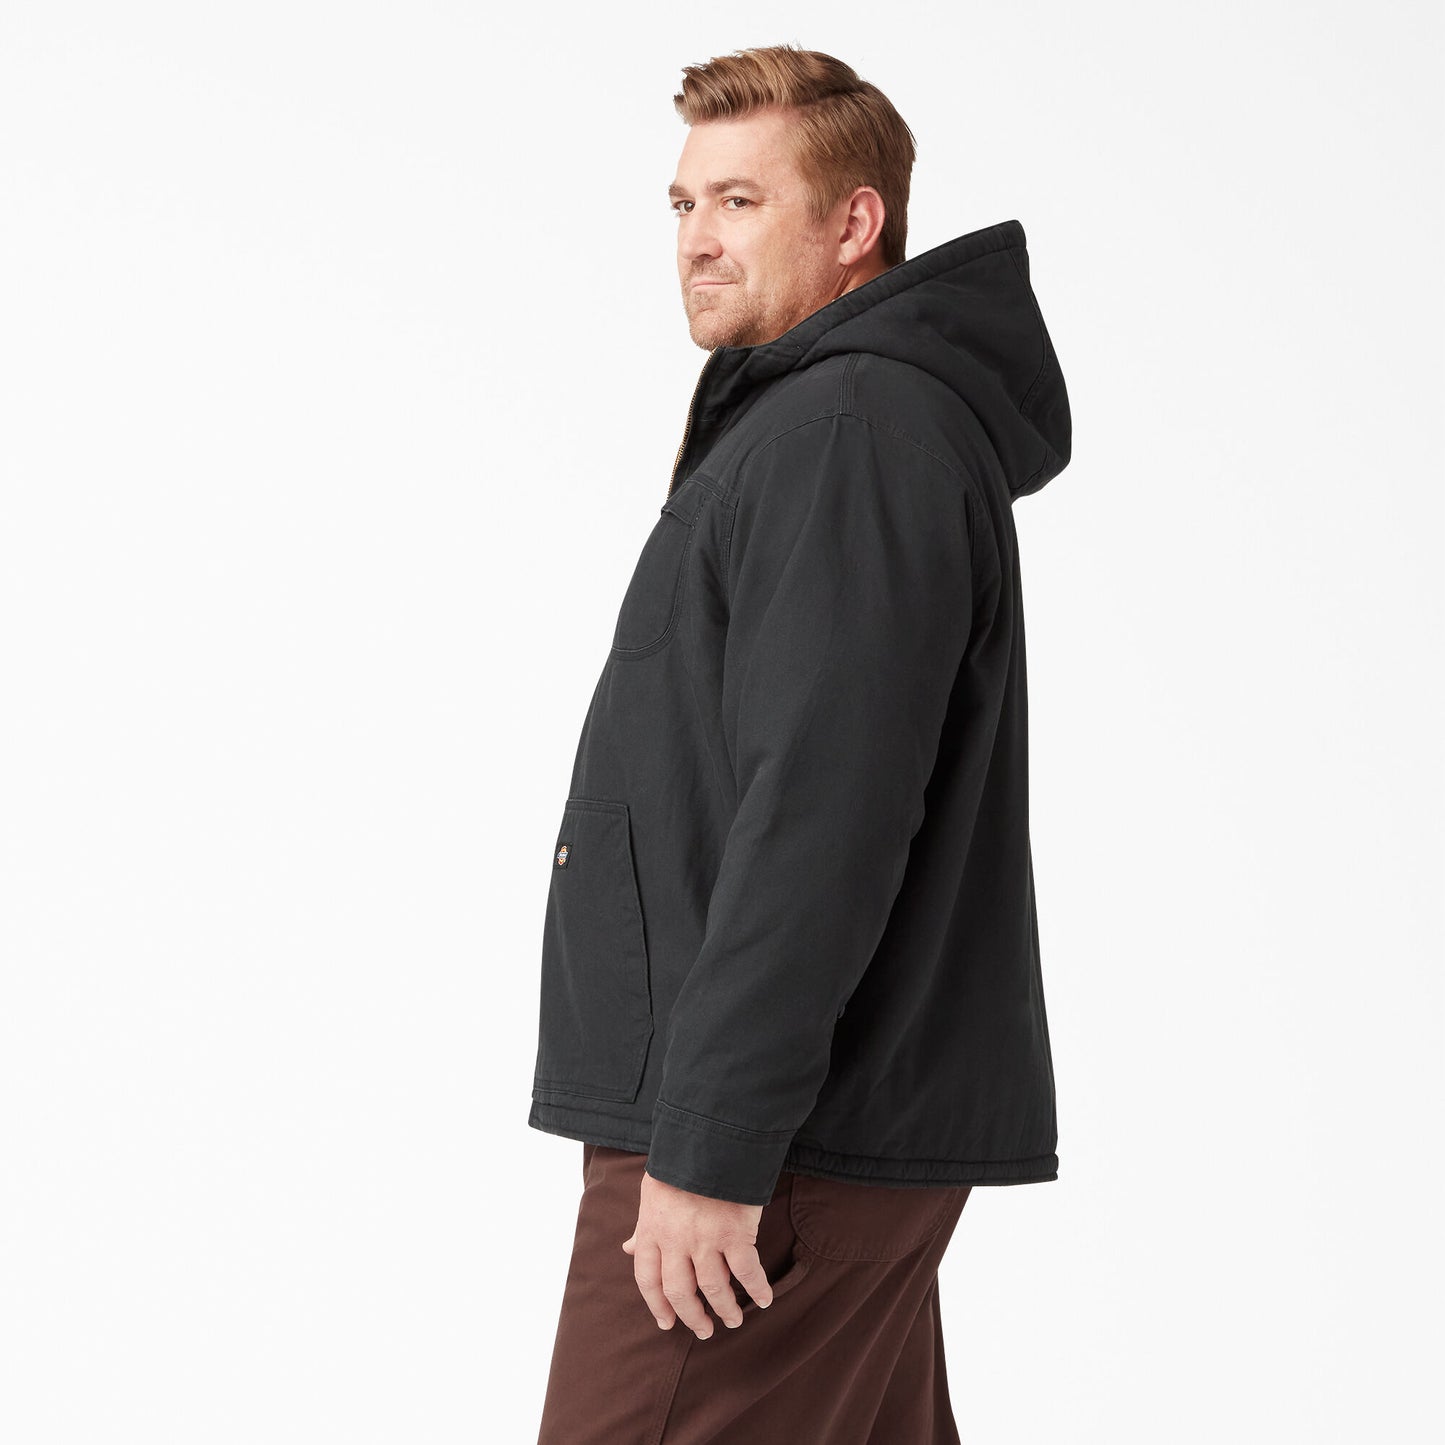 Dickies Duck High Pile Fleece Lined Hooded Jacket - Big and Tall